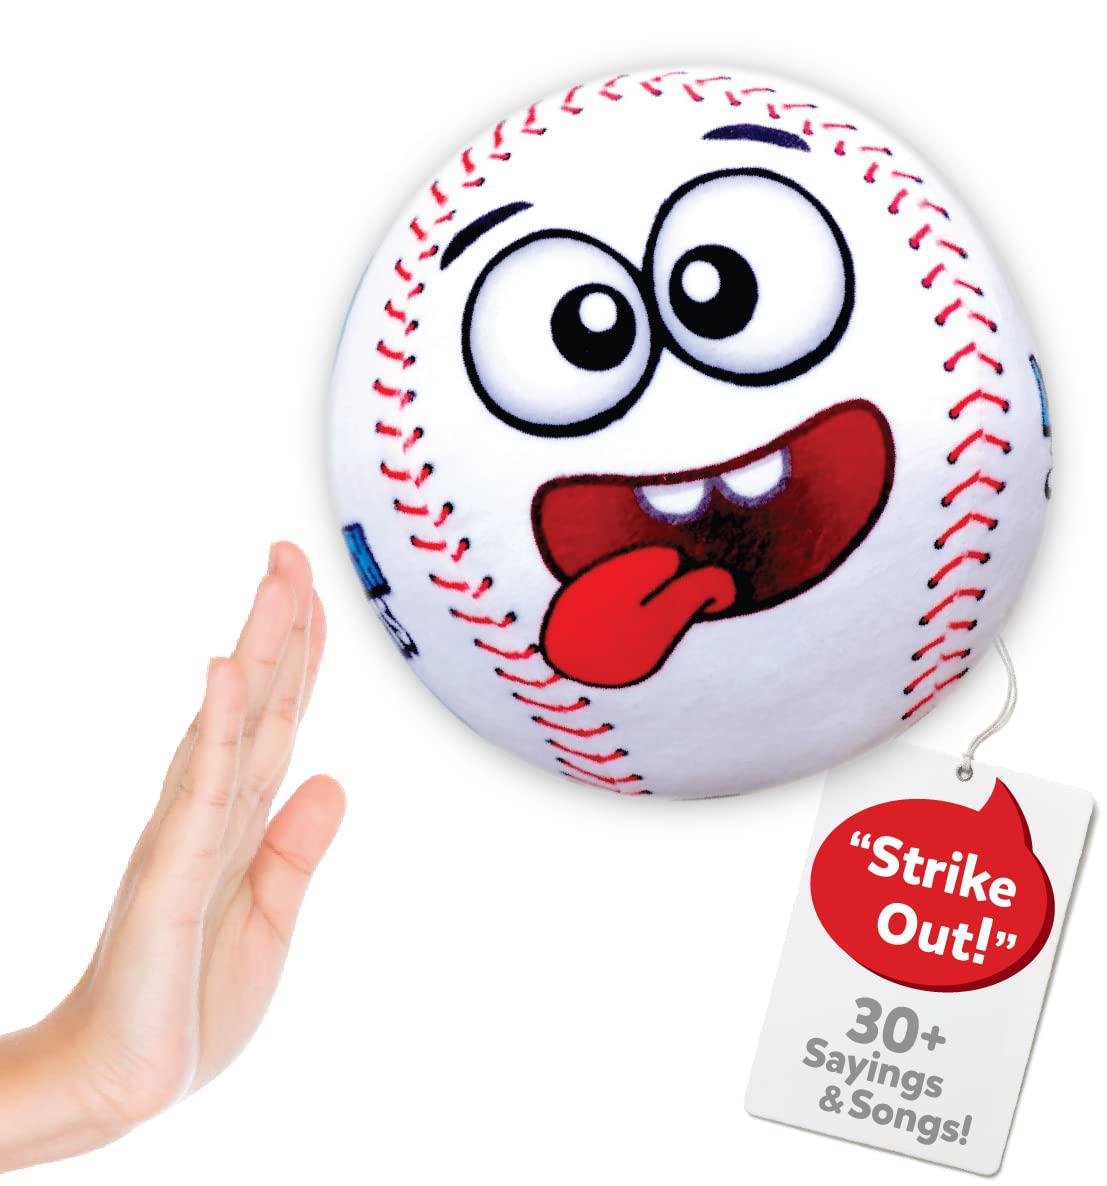 move2play, hilariously interactive toy baseball with music and sound effects, ball for toddlers, birthday gift for boys and g